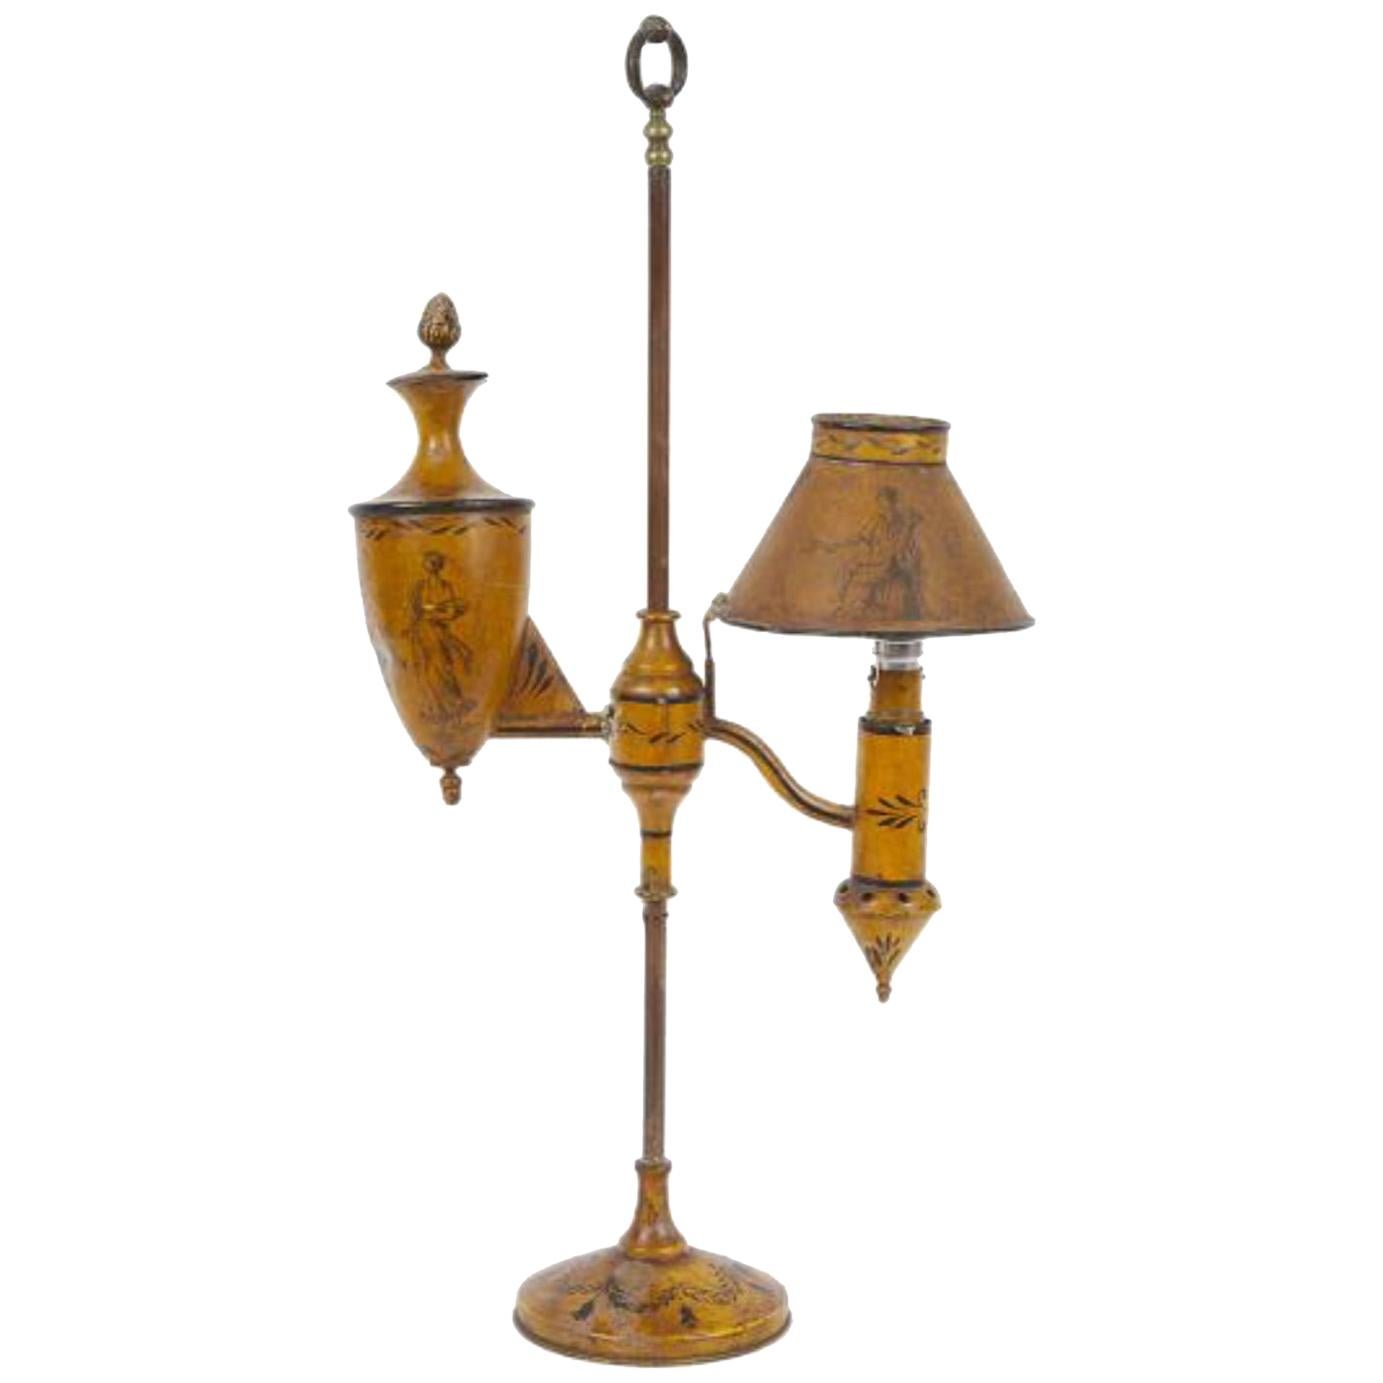 19th Century French Hand Painted Adjustable Wooden Desk Lamp